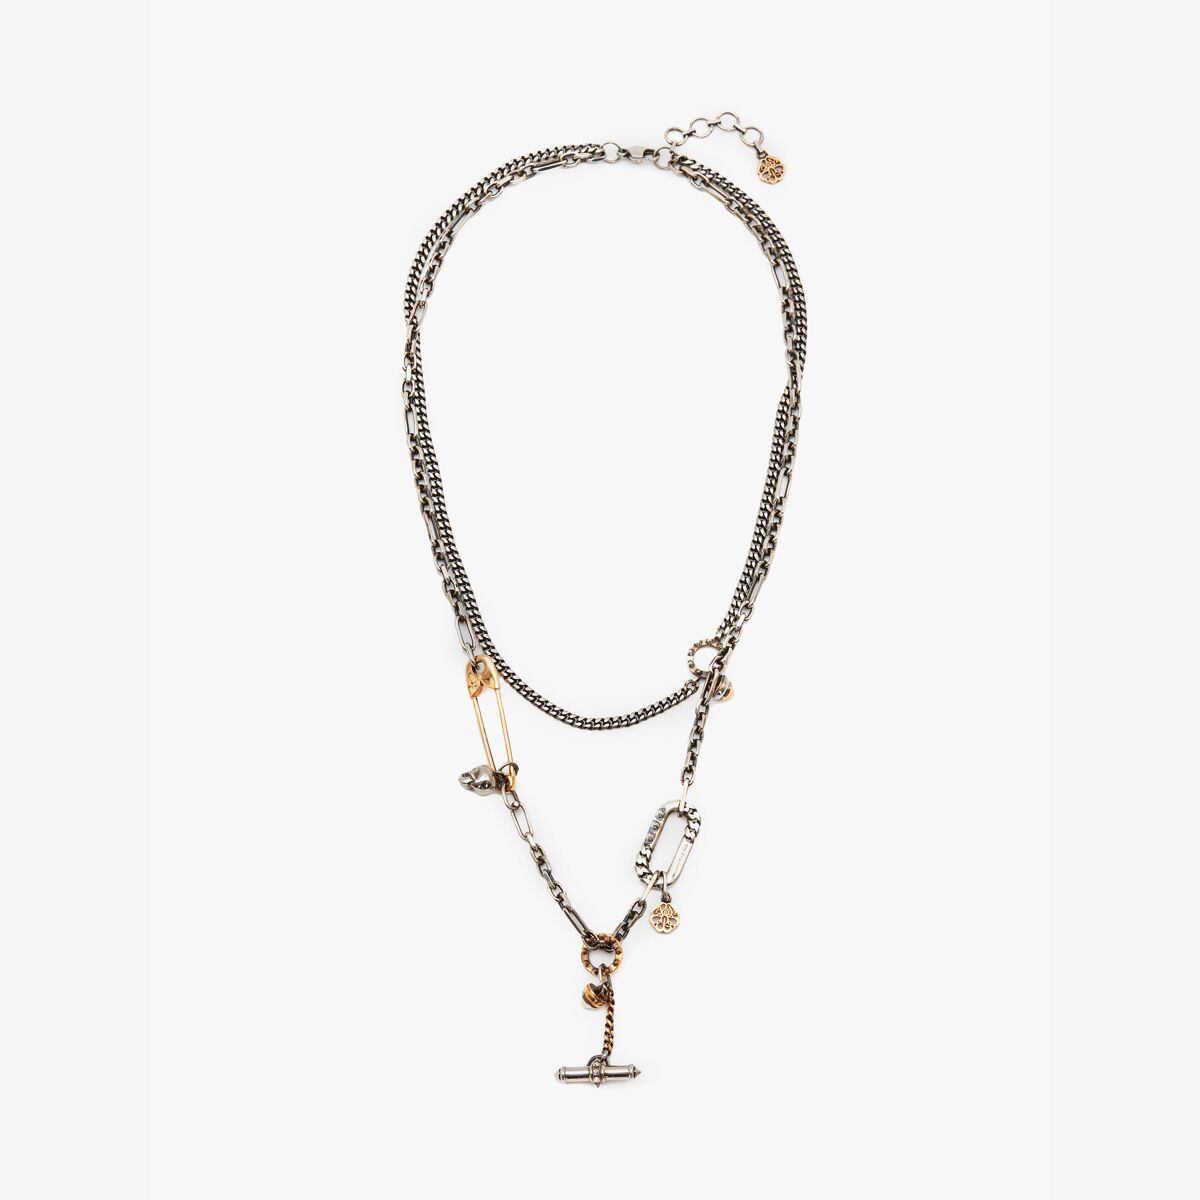 ALEXANDER MCQUEEN Safety Pin and Stud Necklace